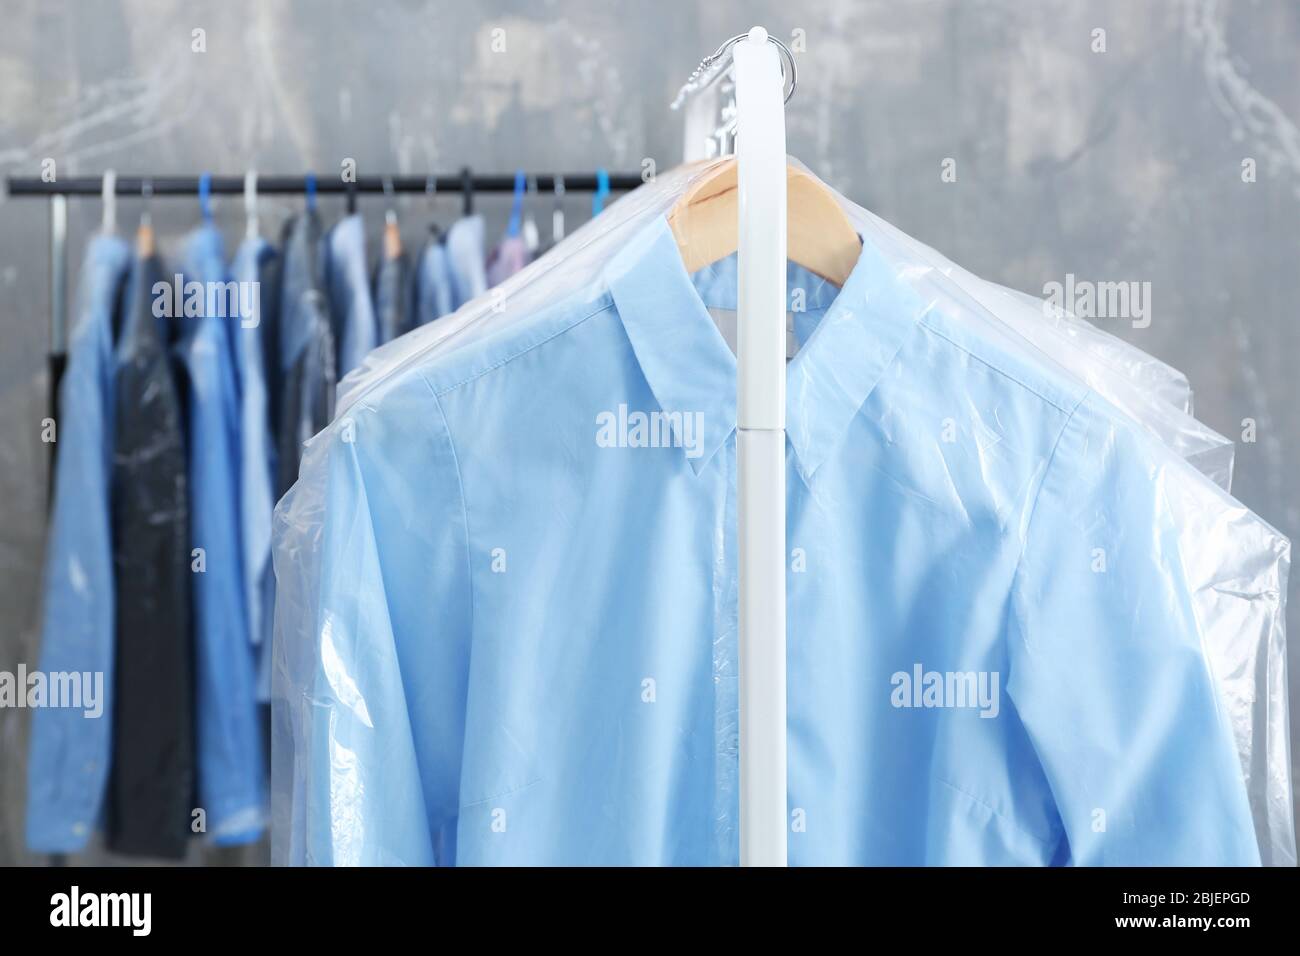 https://c8.alamy.com/comp/2BJEPGD/rack-of-clean-clothes-hanging-on-hangers-at-dry-cleaning-2BJEPGD.jpg